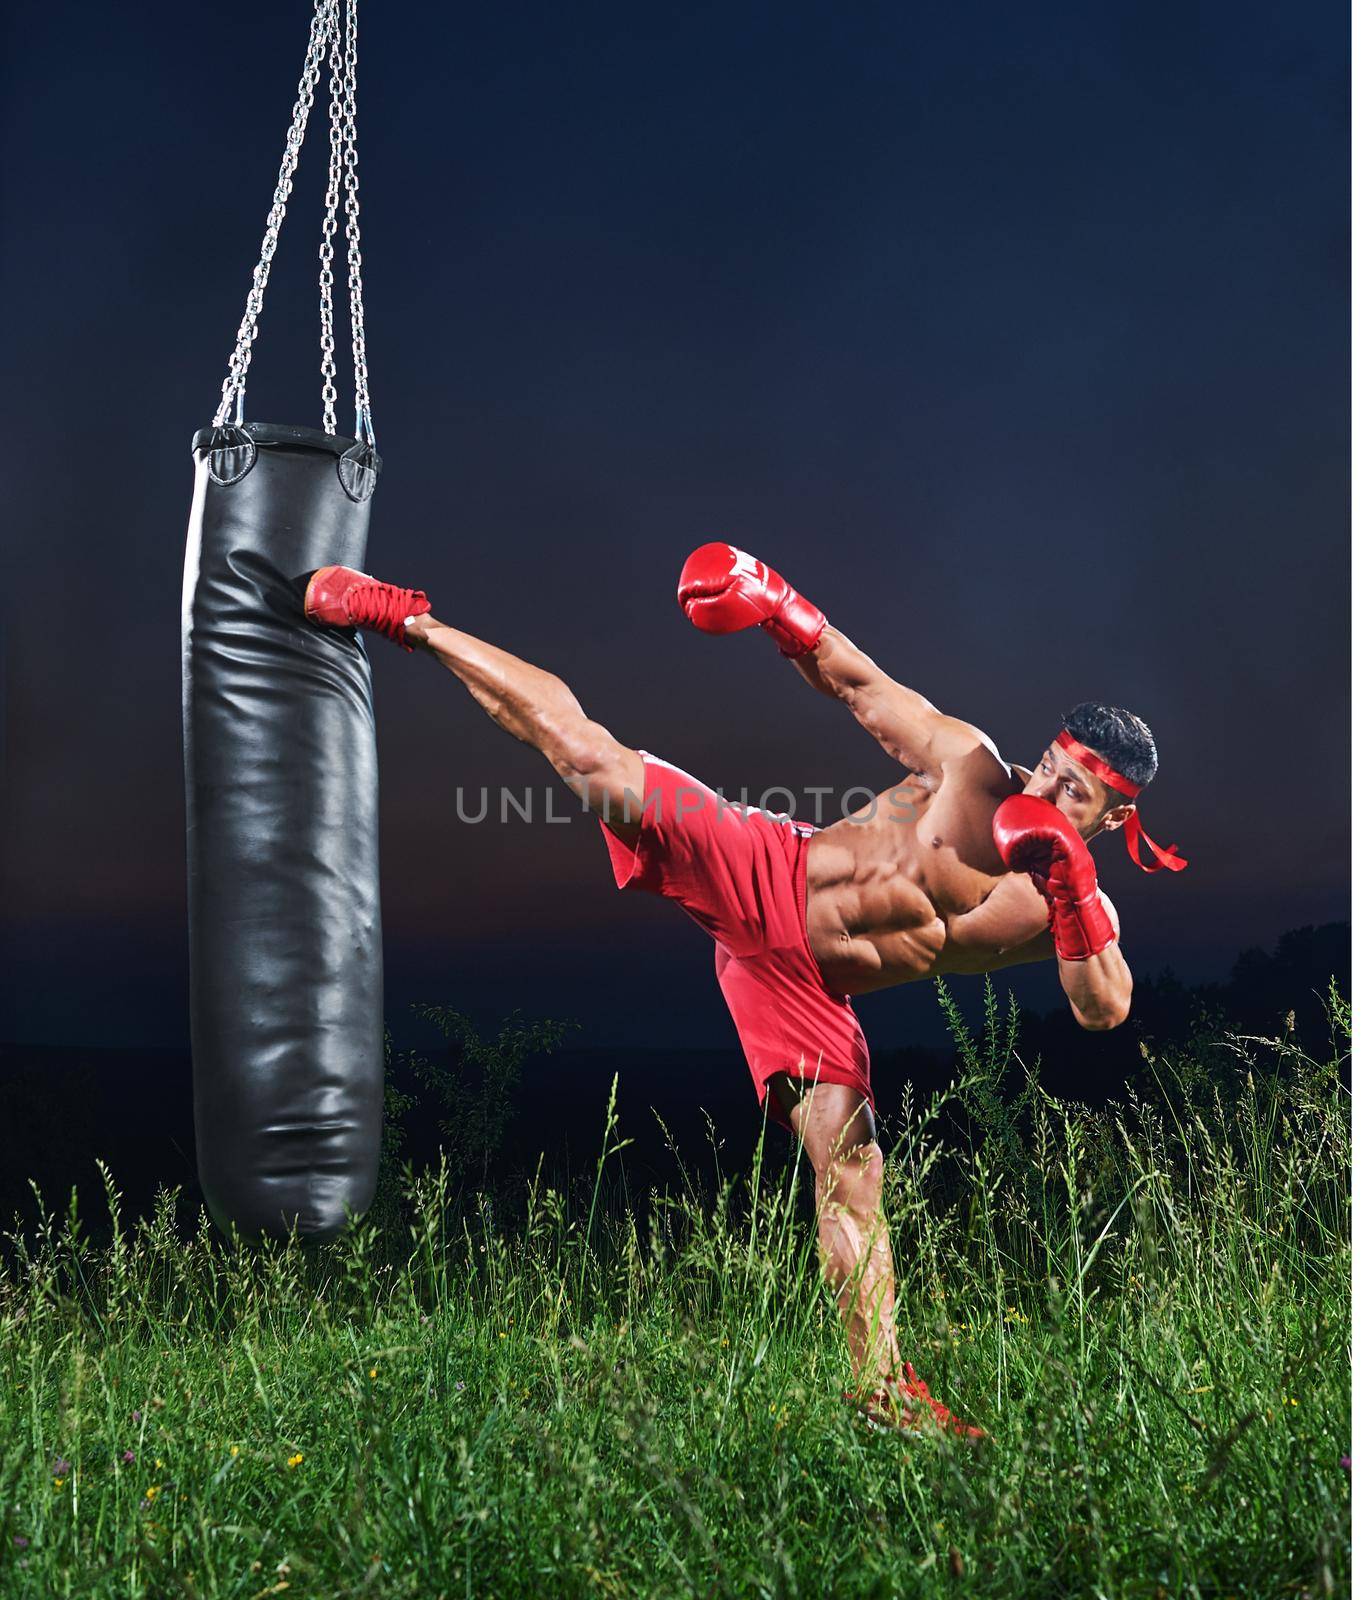 Handsome young strong muscular fighter exercising with a punching bag practicing his high kick martial arts combat fighting kickboxing Muay Thai strength power masculinity energy effort athlete.